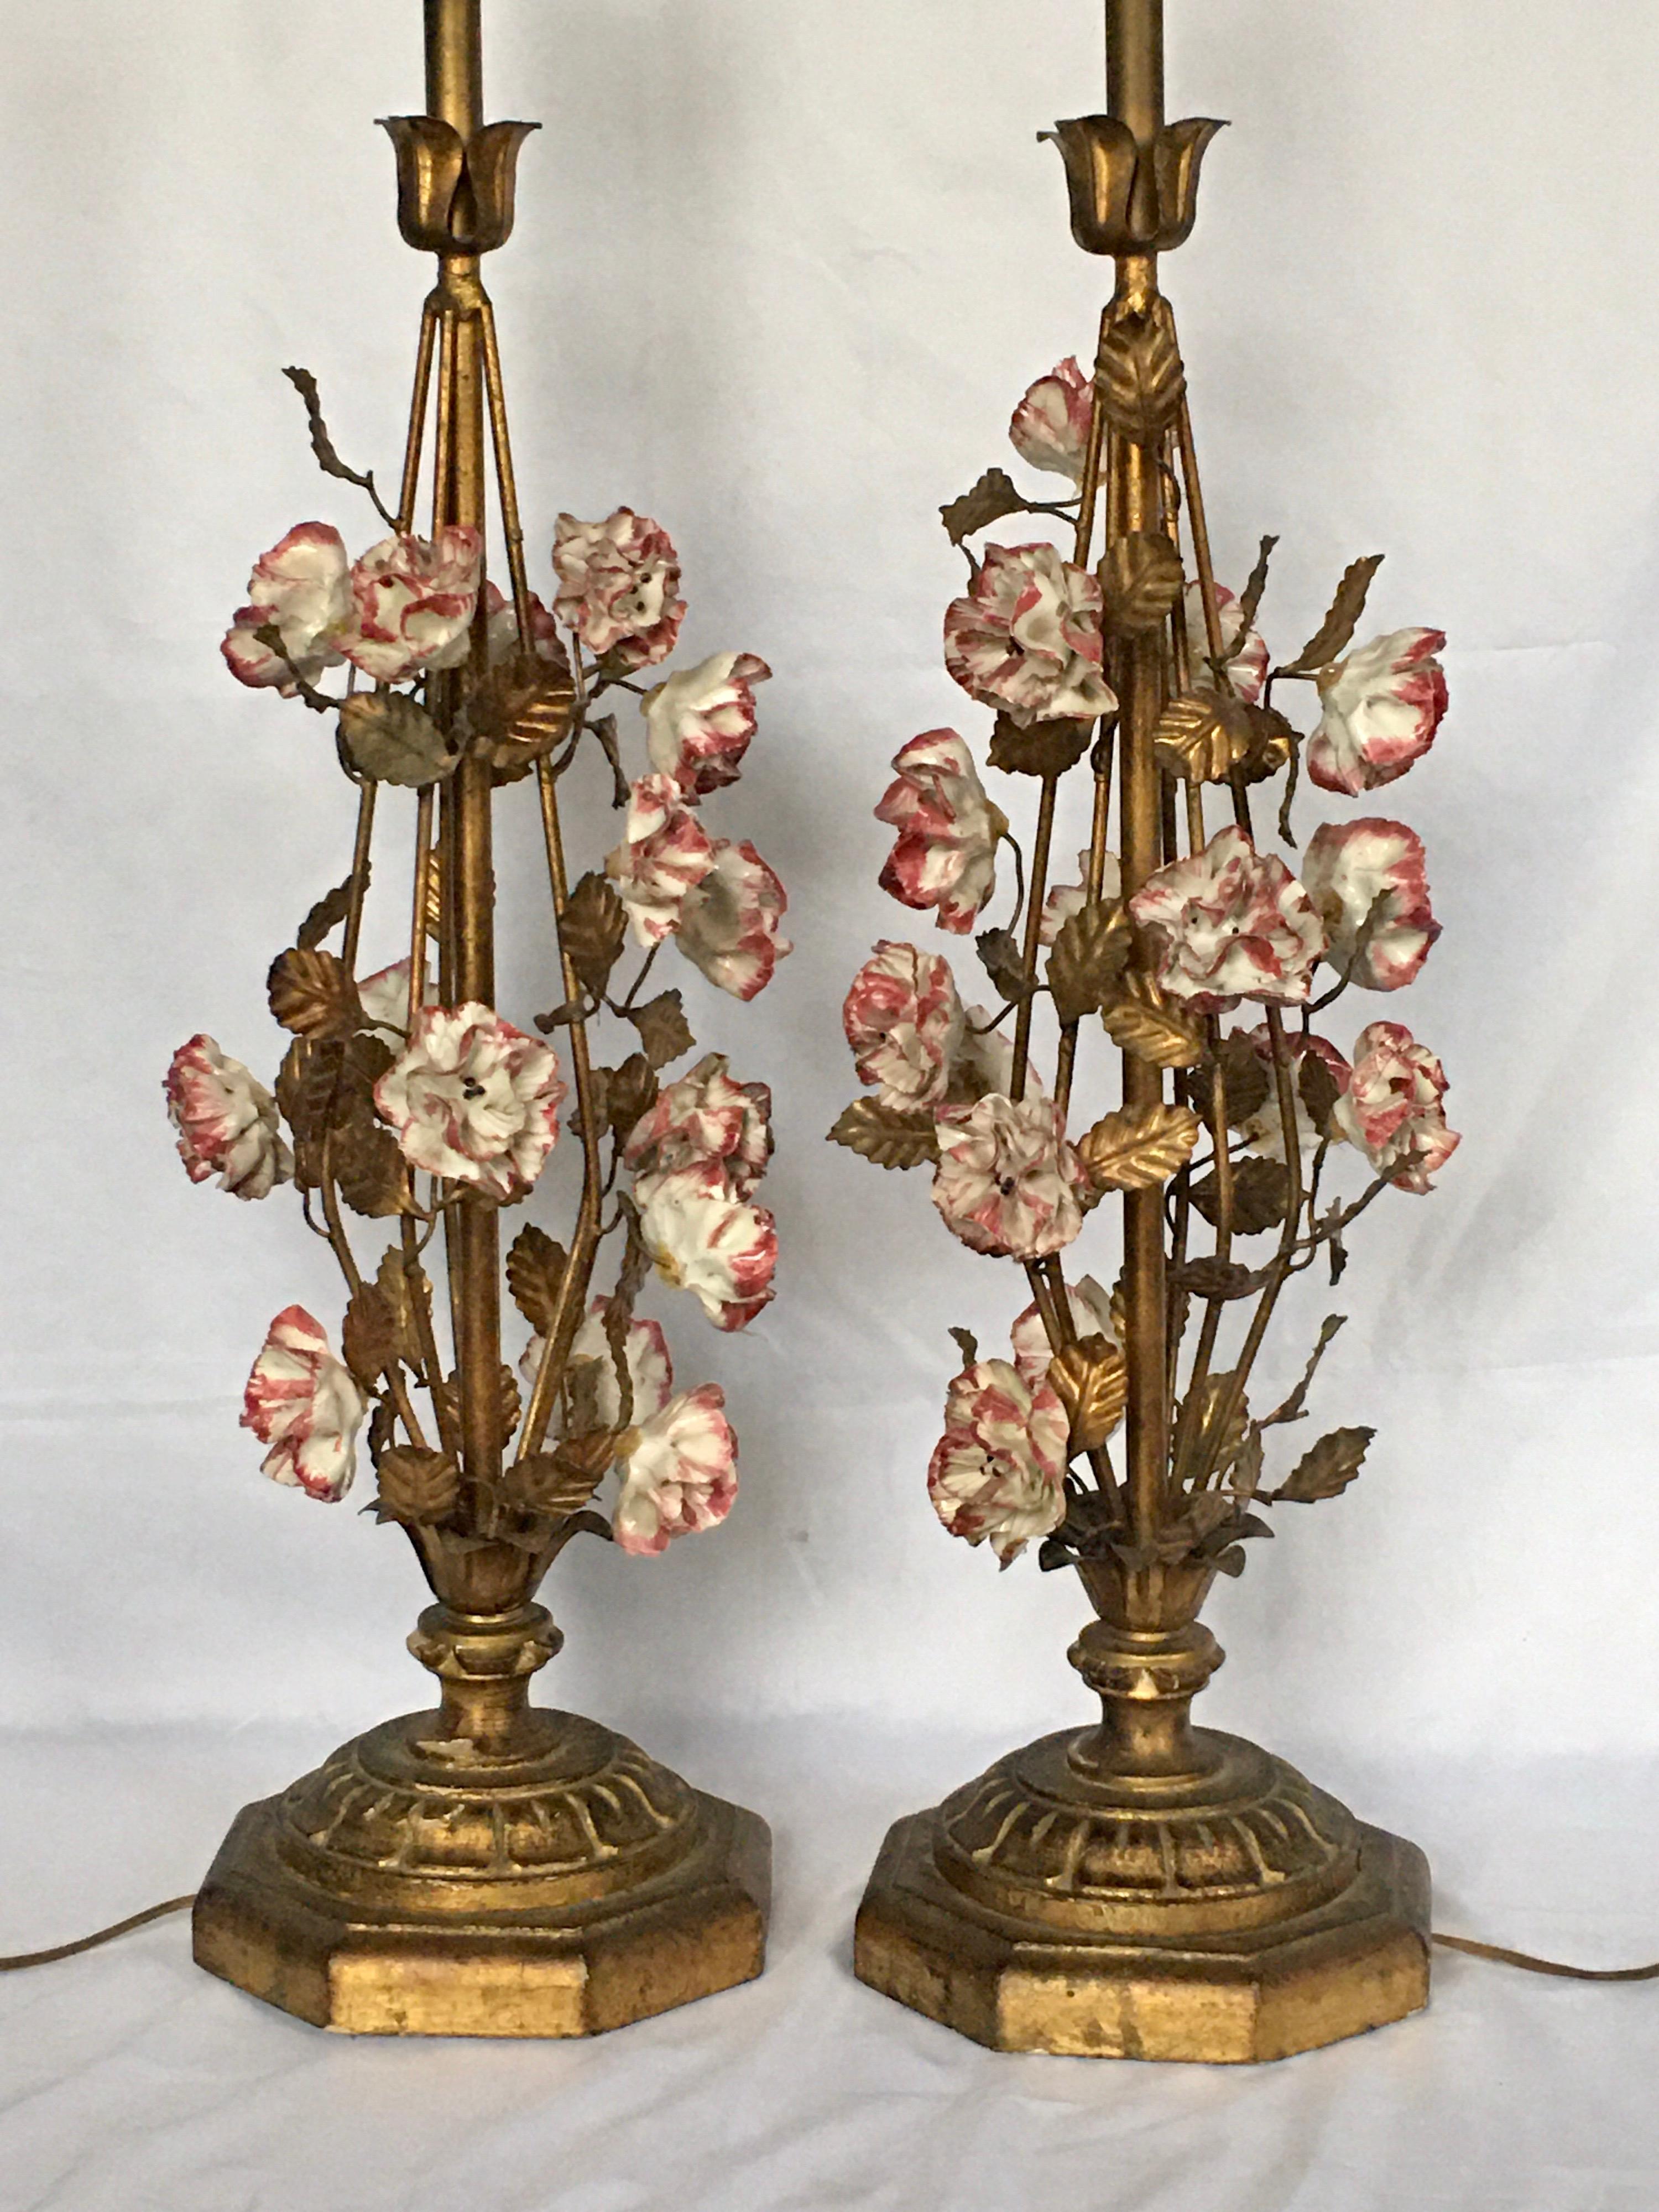 Pair of Hollywood Regency tole floral table lamps mounted on carved giltwood bases. These Italian lamps feature hand painted porcelain blooms with metal gilt vines and leaves. Bases marked 'Made In Italy'. Lamp shades not included. 

Height to